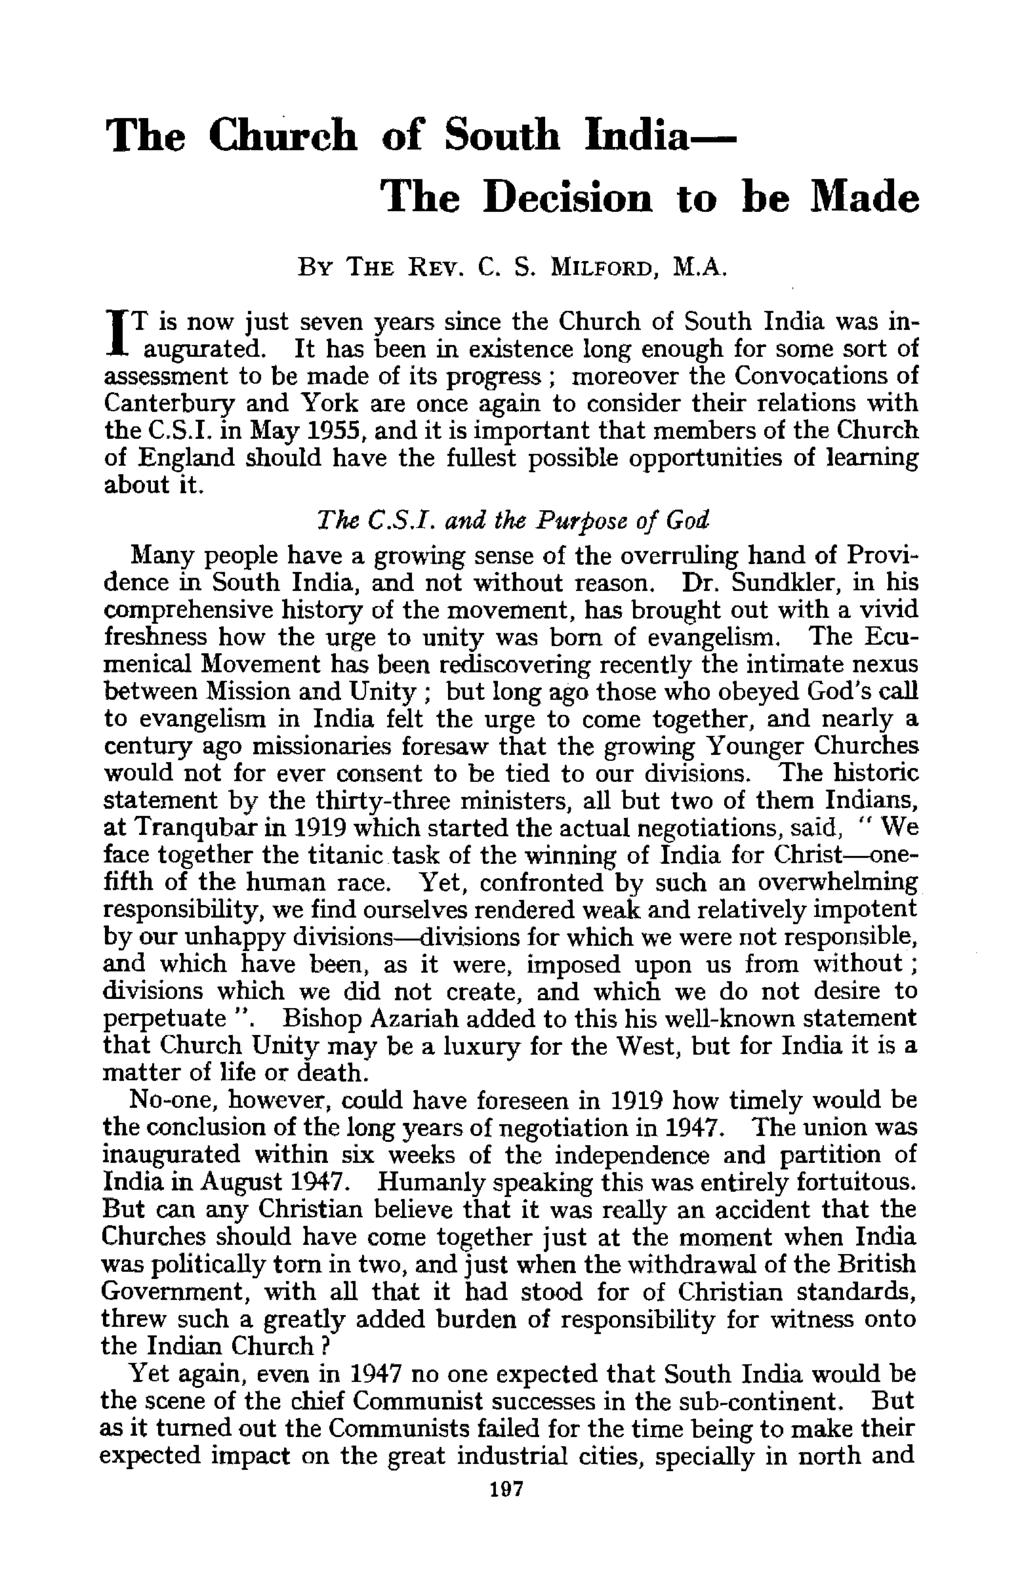 The Church of South India- The Decision to be Made I BY THE REV. C. S. MILFORD, M.A. T is now just seven years since the Church of South India was inaugurated.